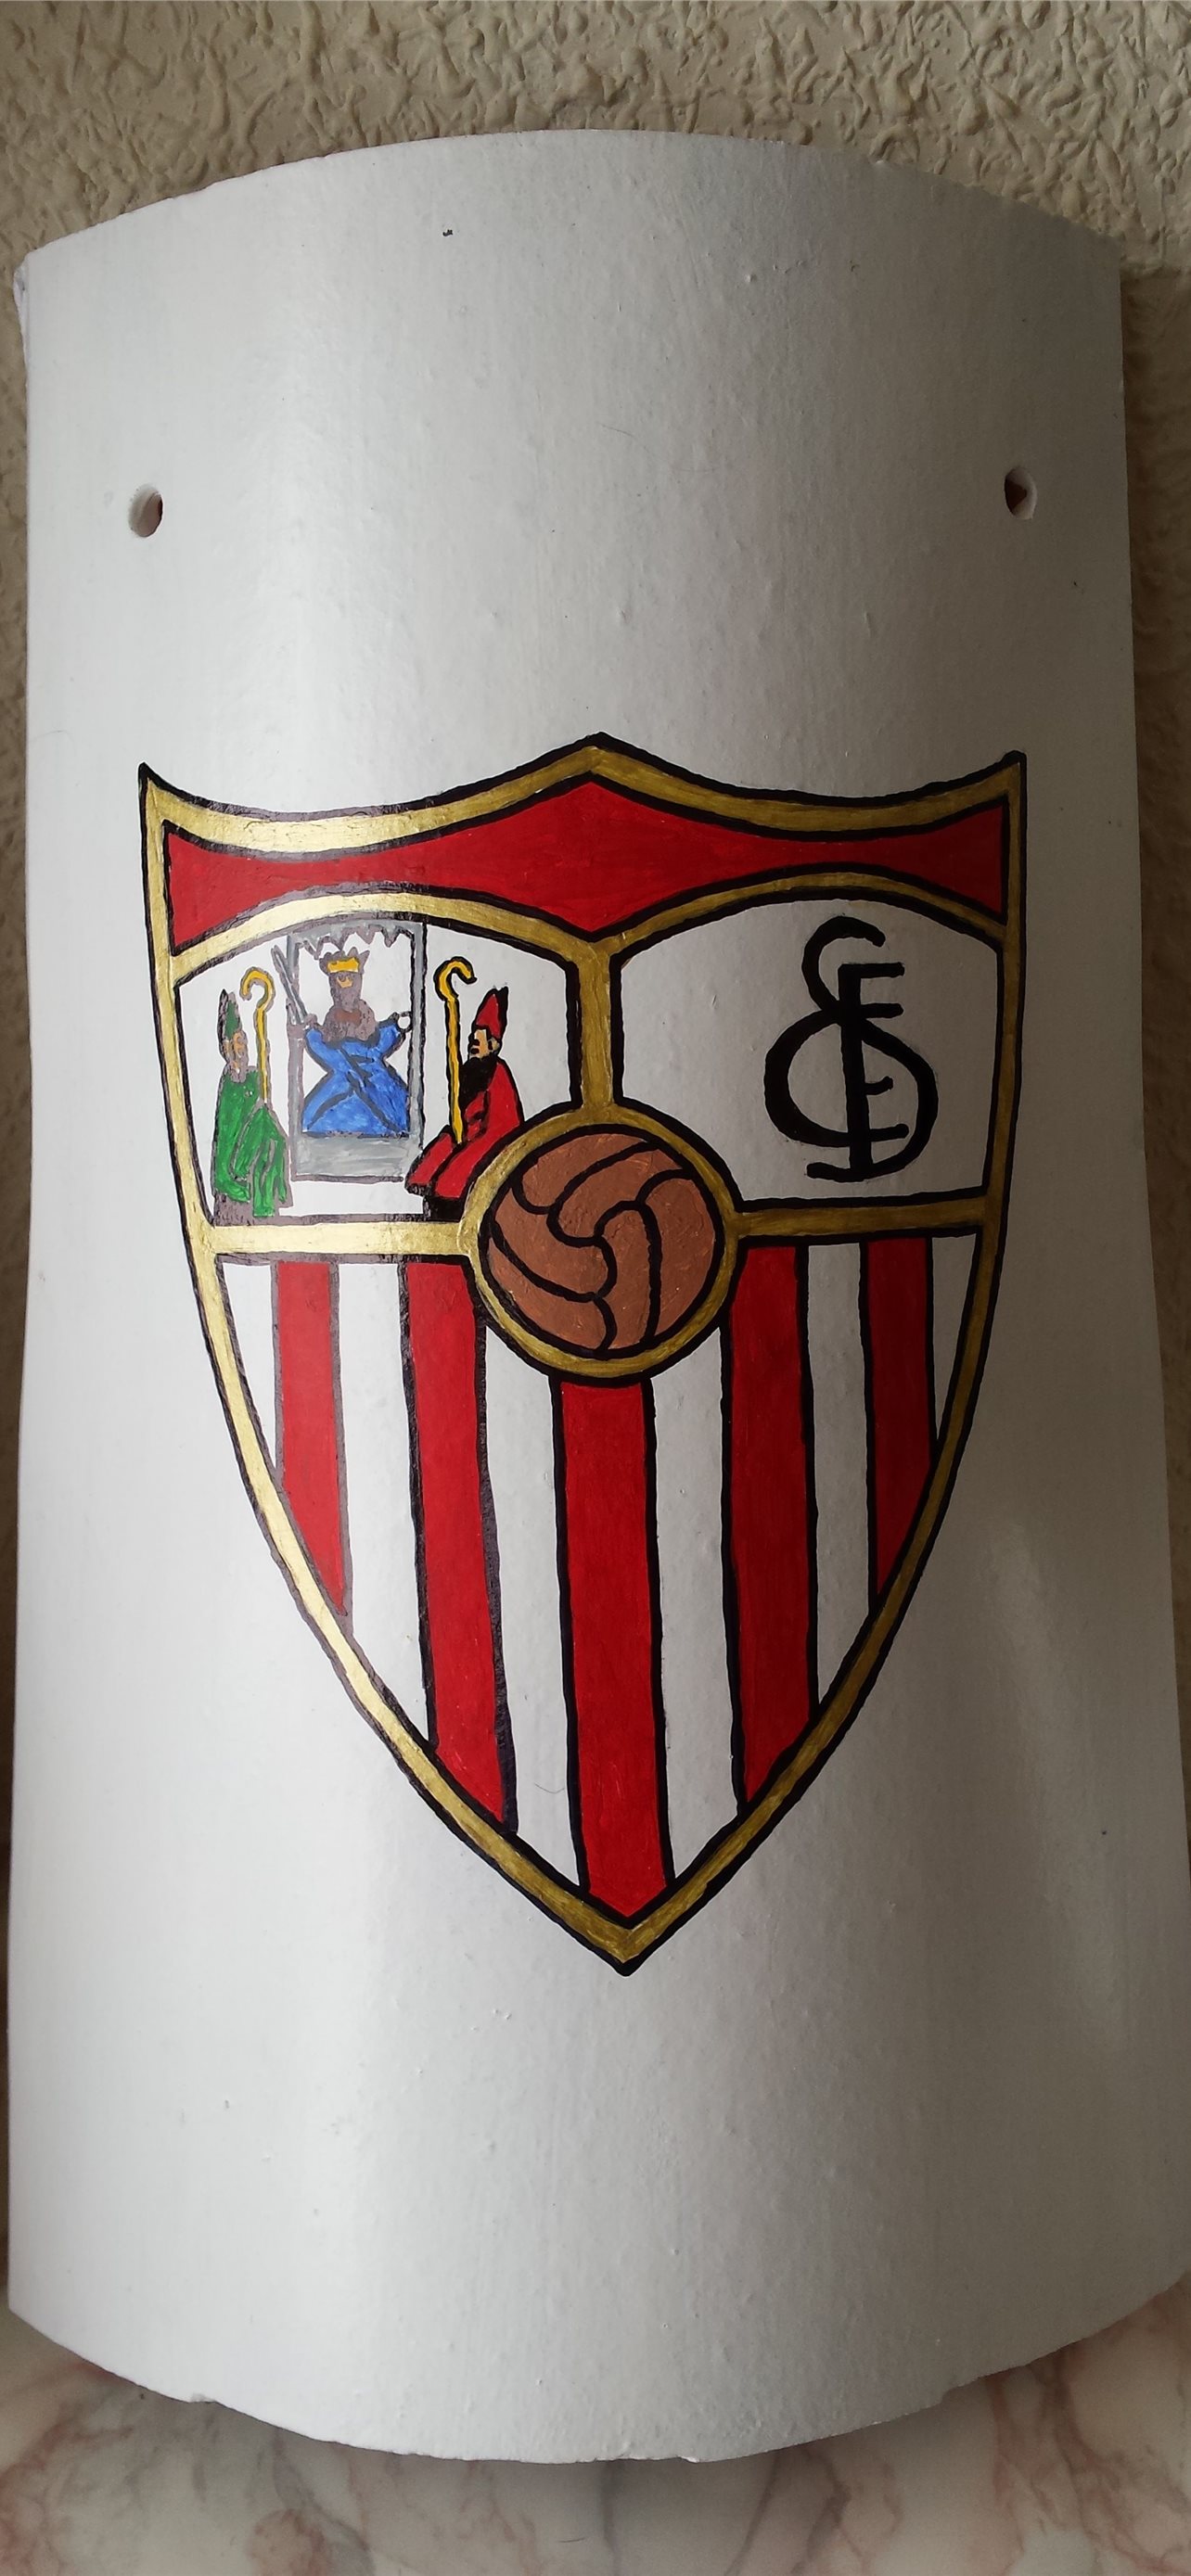 Sevilla Fc Iphone Wallpapers Free Download